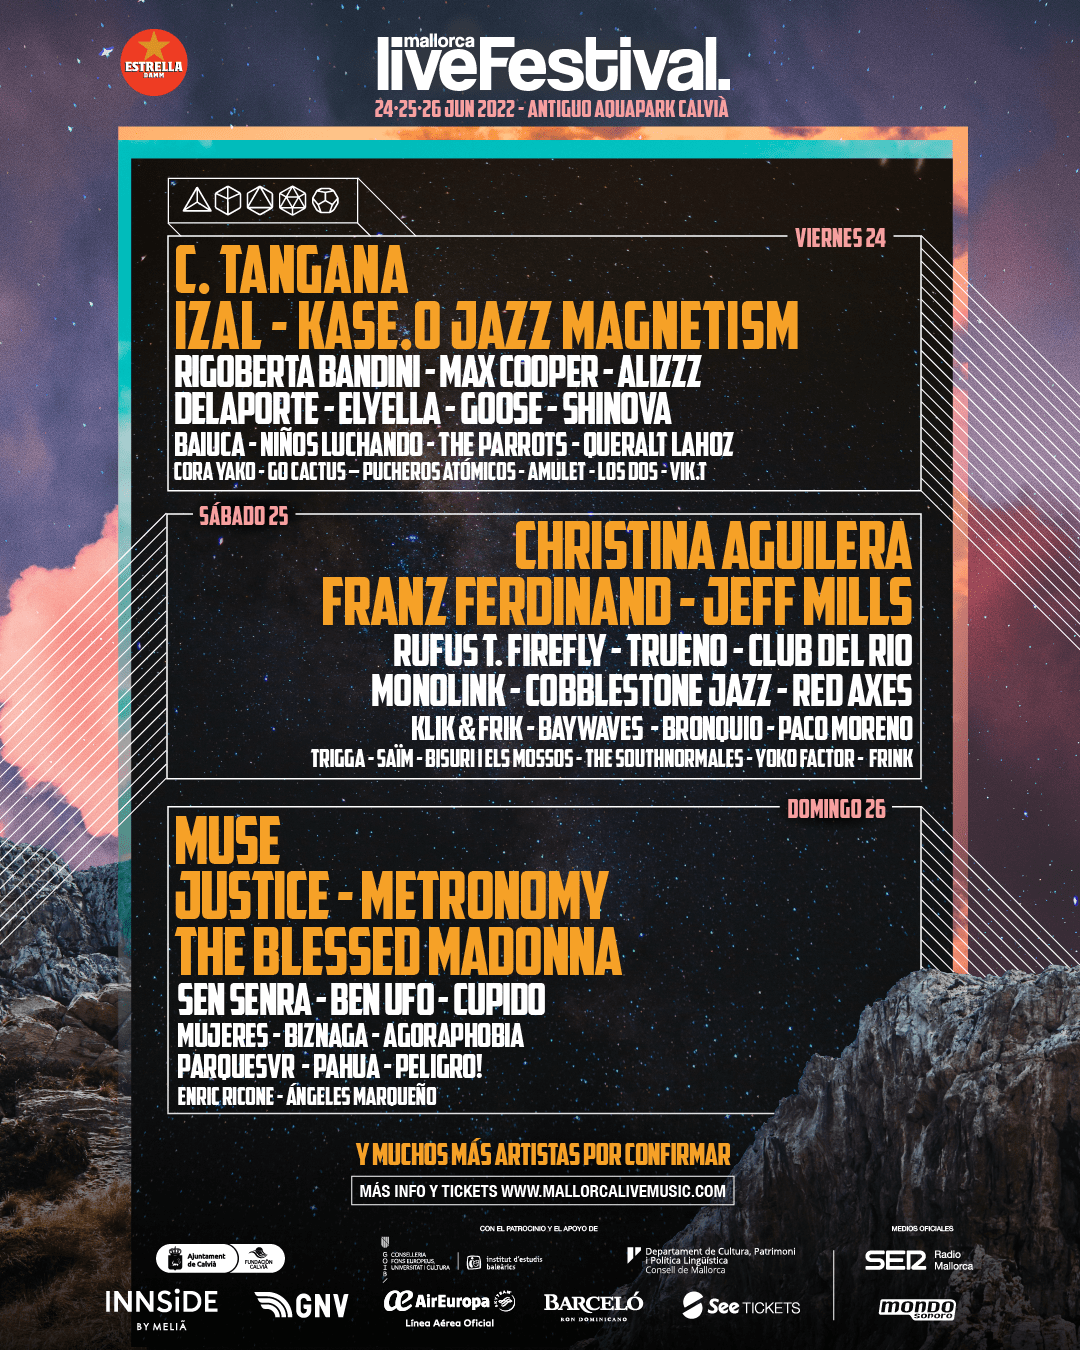 Here it is! We reveal Mallorca Live Festival’s day by day line-up